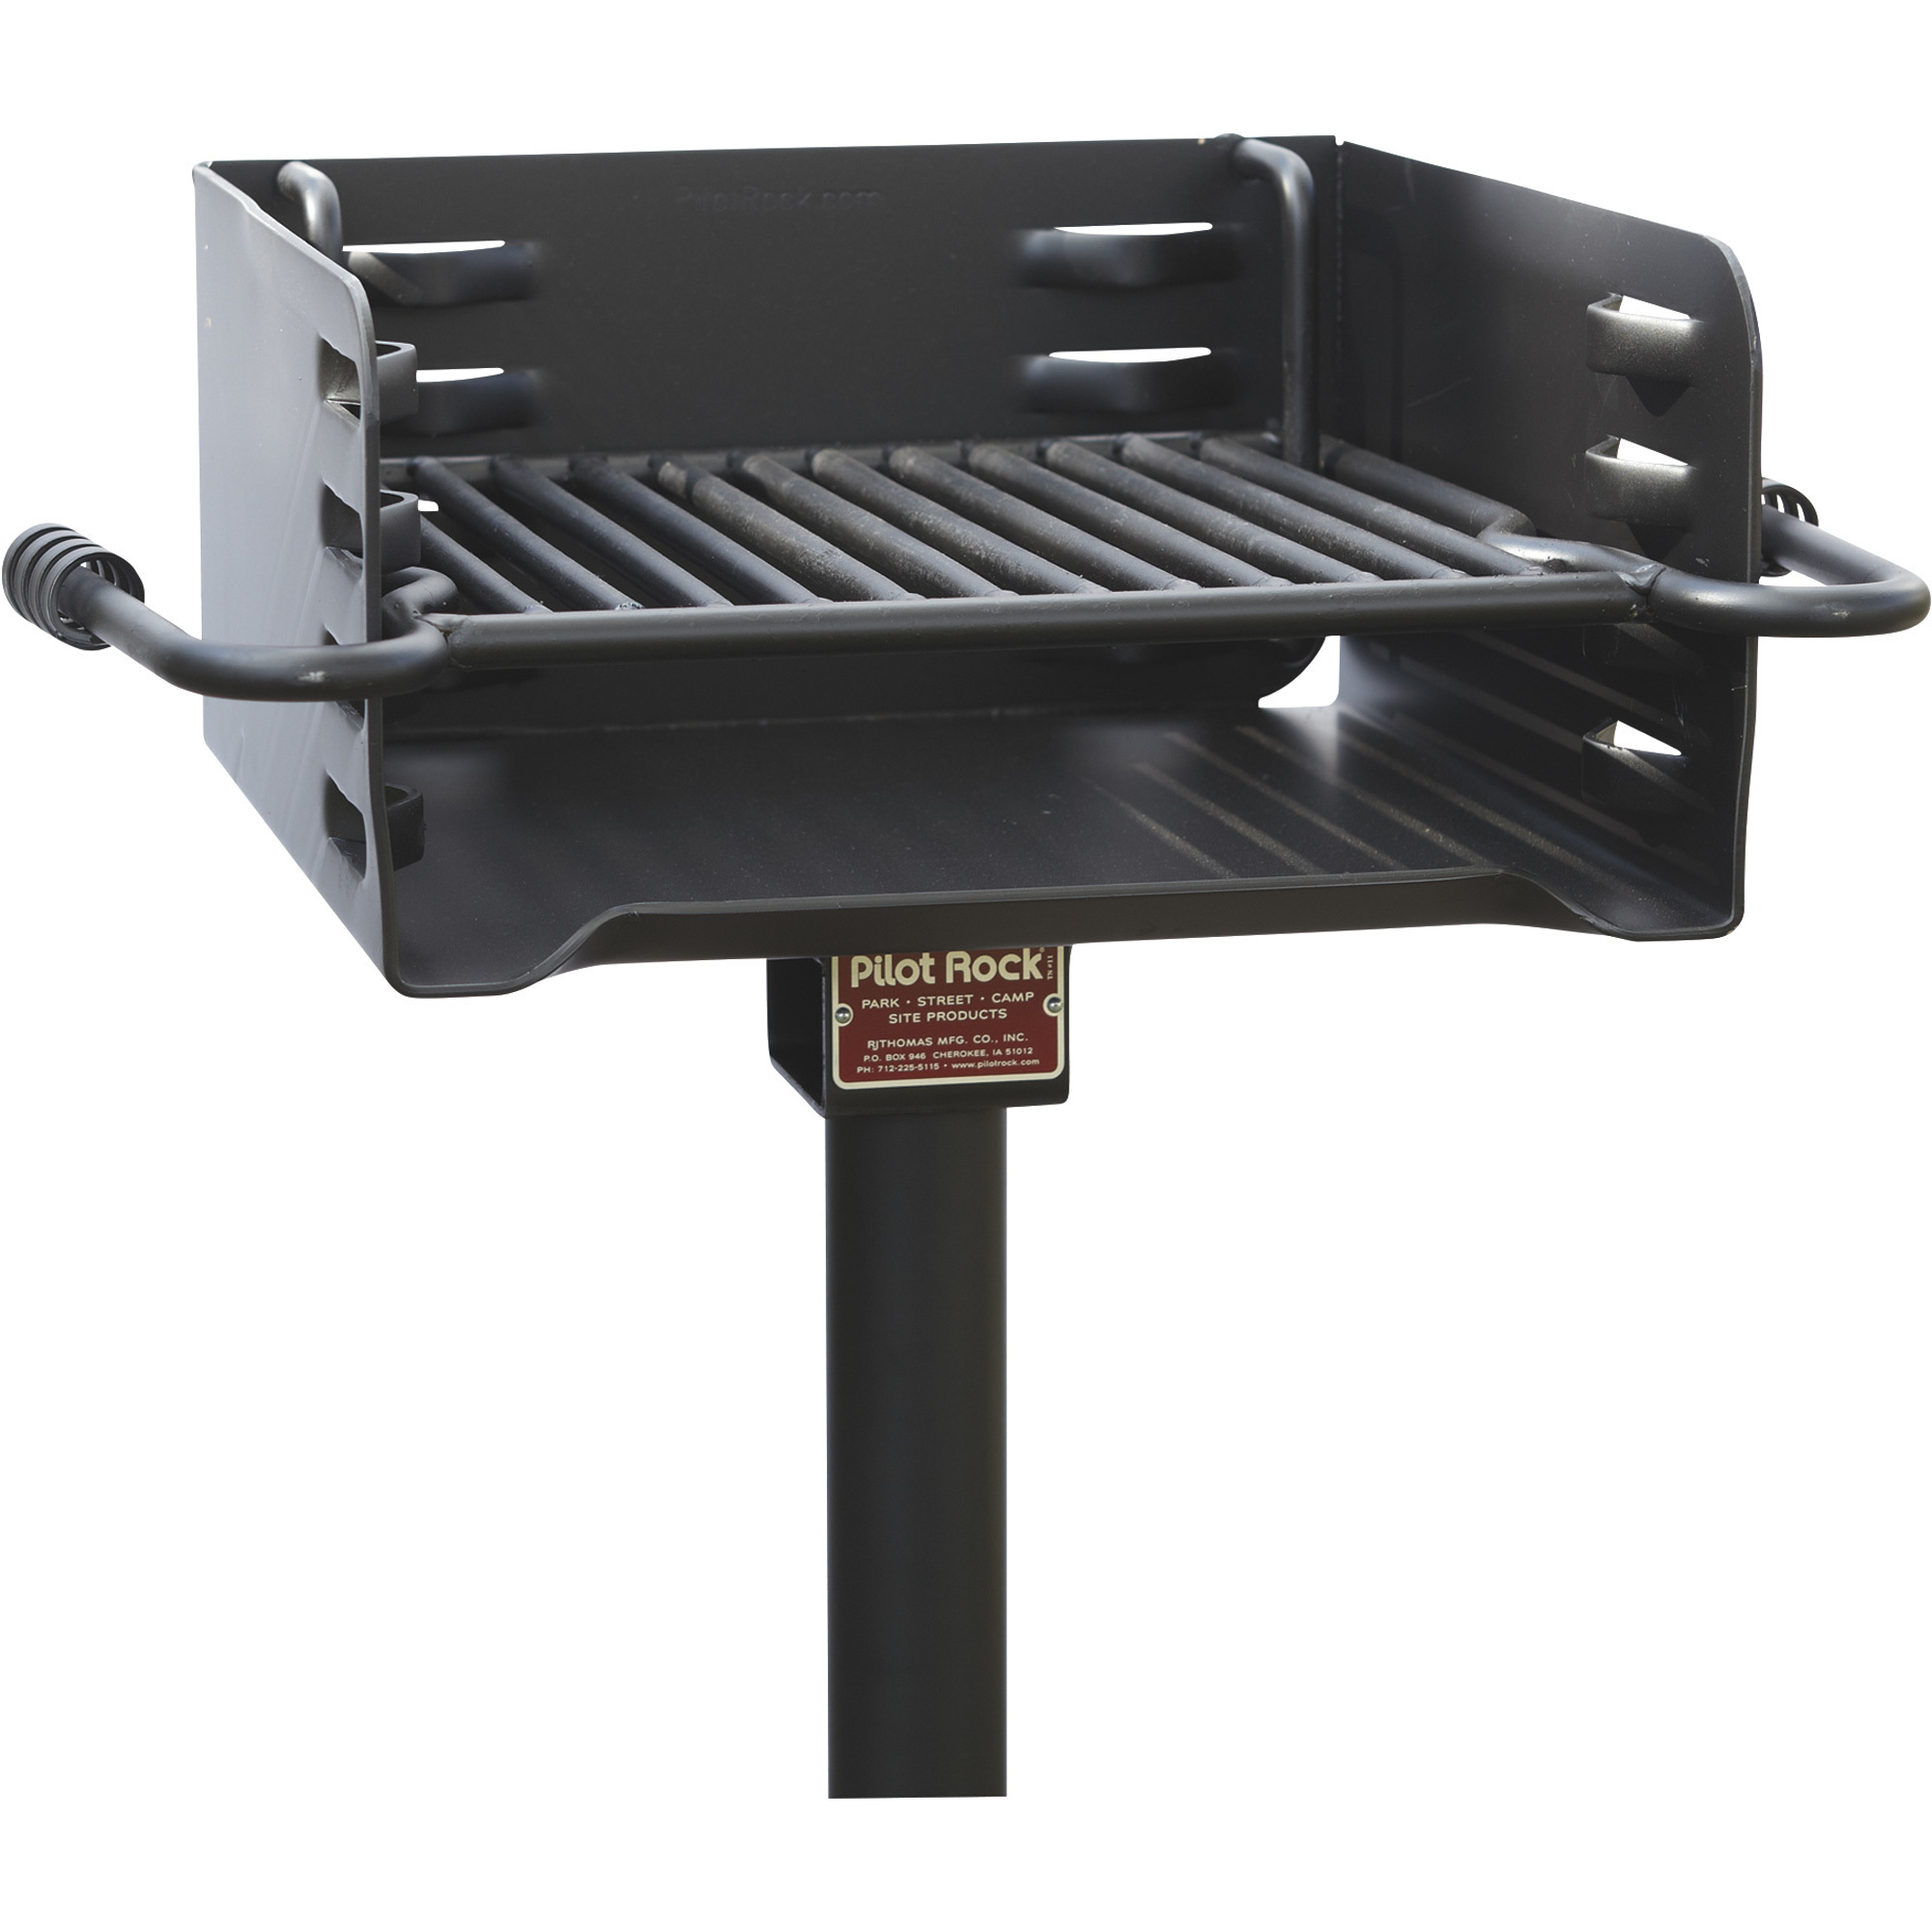 Afleiding last gips Pilot Rock Heavy-Duty Steel Park-Style Charcoal Grill — 16in. x 16in.,  Model# H-16 B6X2 | Northern Tool